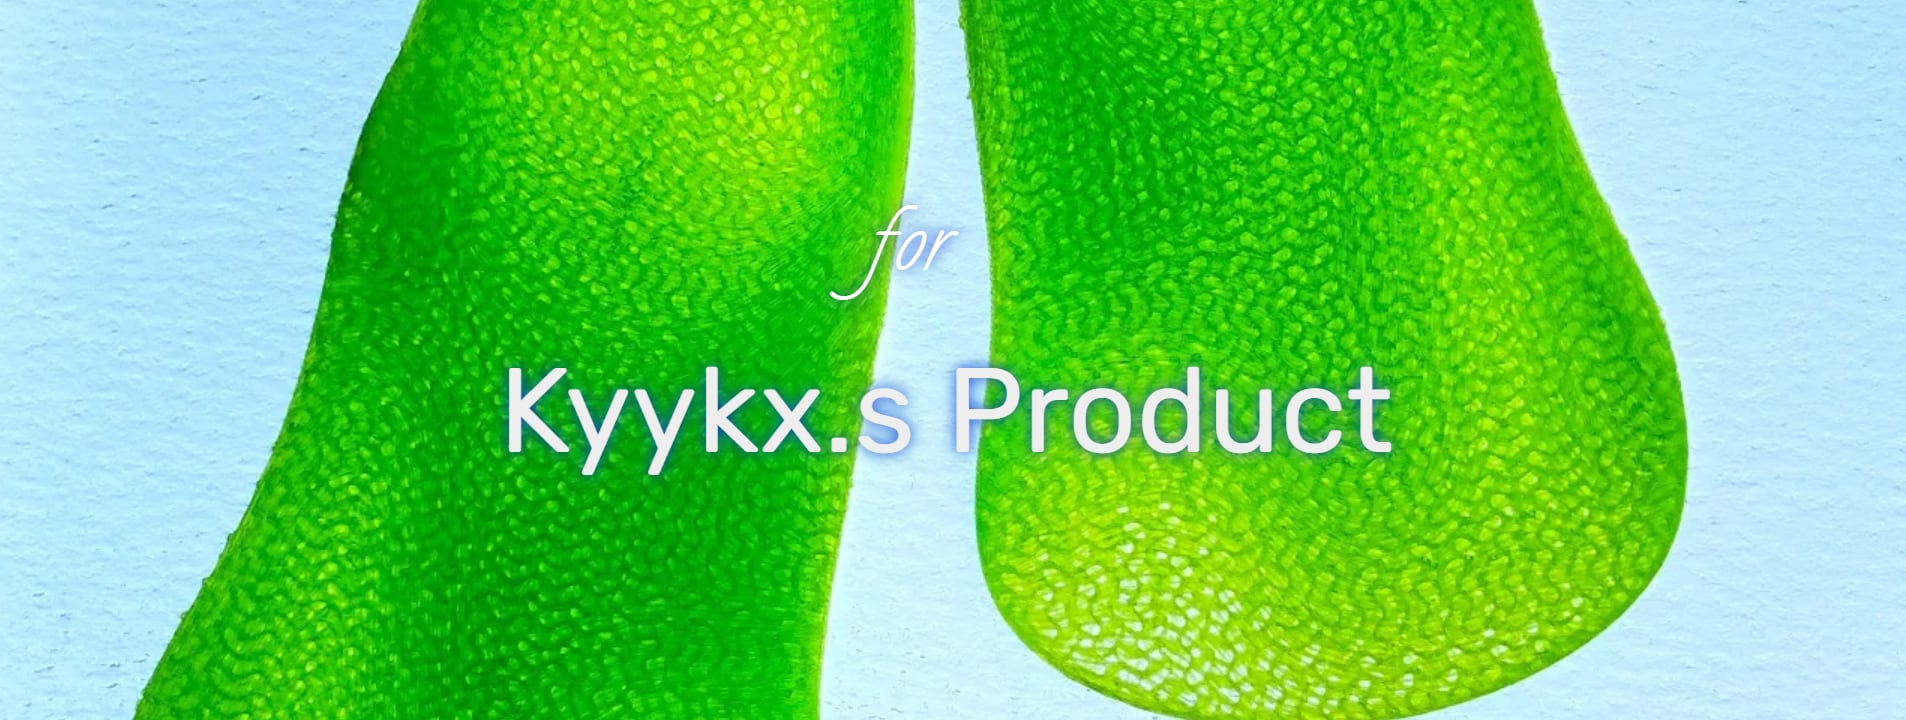 Kyykx.s Product